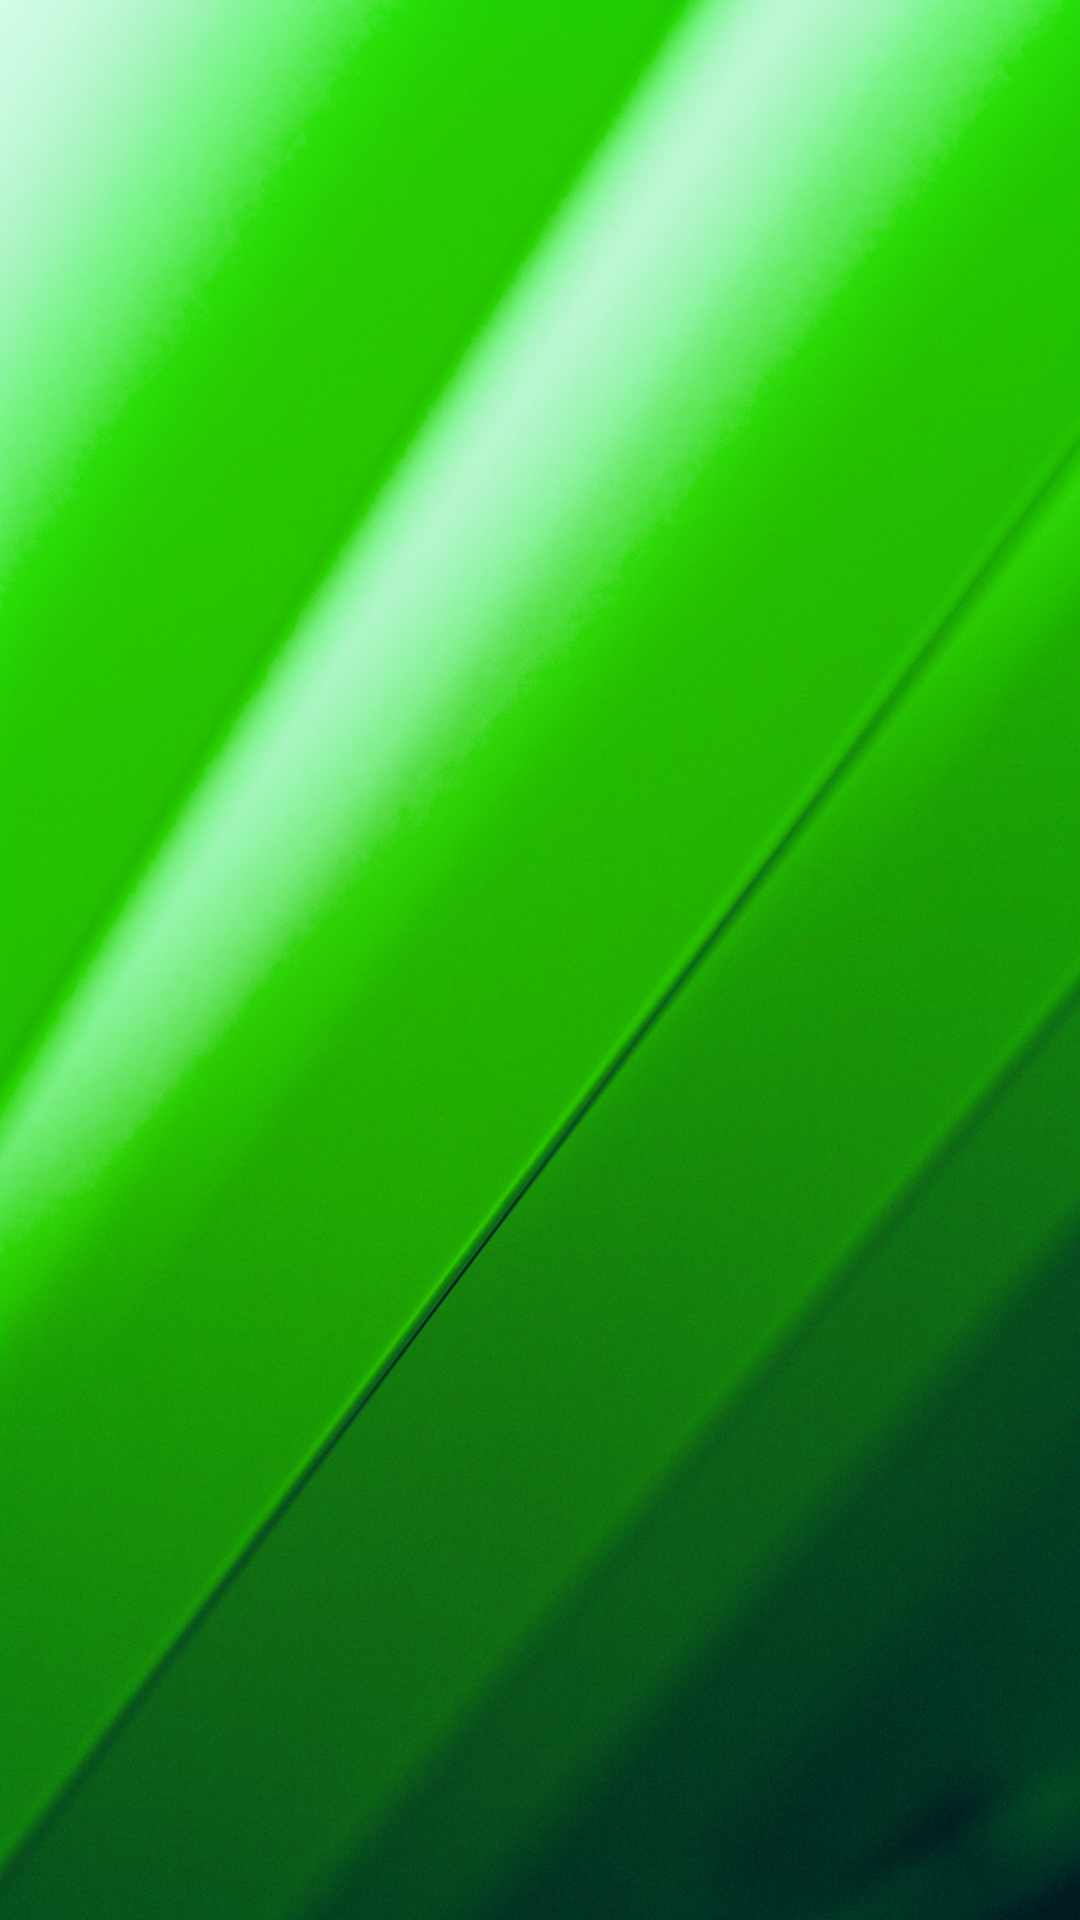 Free Download Wallpapers A Simple Green Android Wallpaper Android Wallpapers 1080x19 For Your Desktop Mobile Tablet Explore 49 Simple Android Wallpaper Android Wallpapers Hd Free Wallpaper For Android Wallpapers